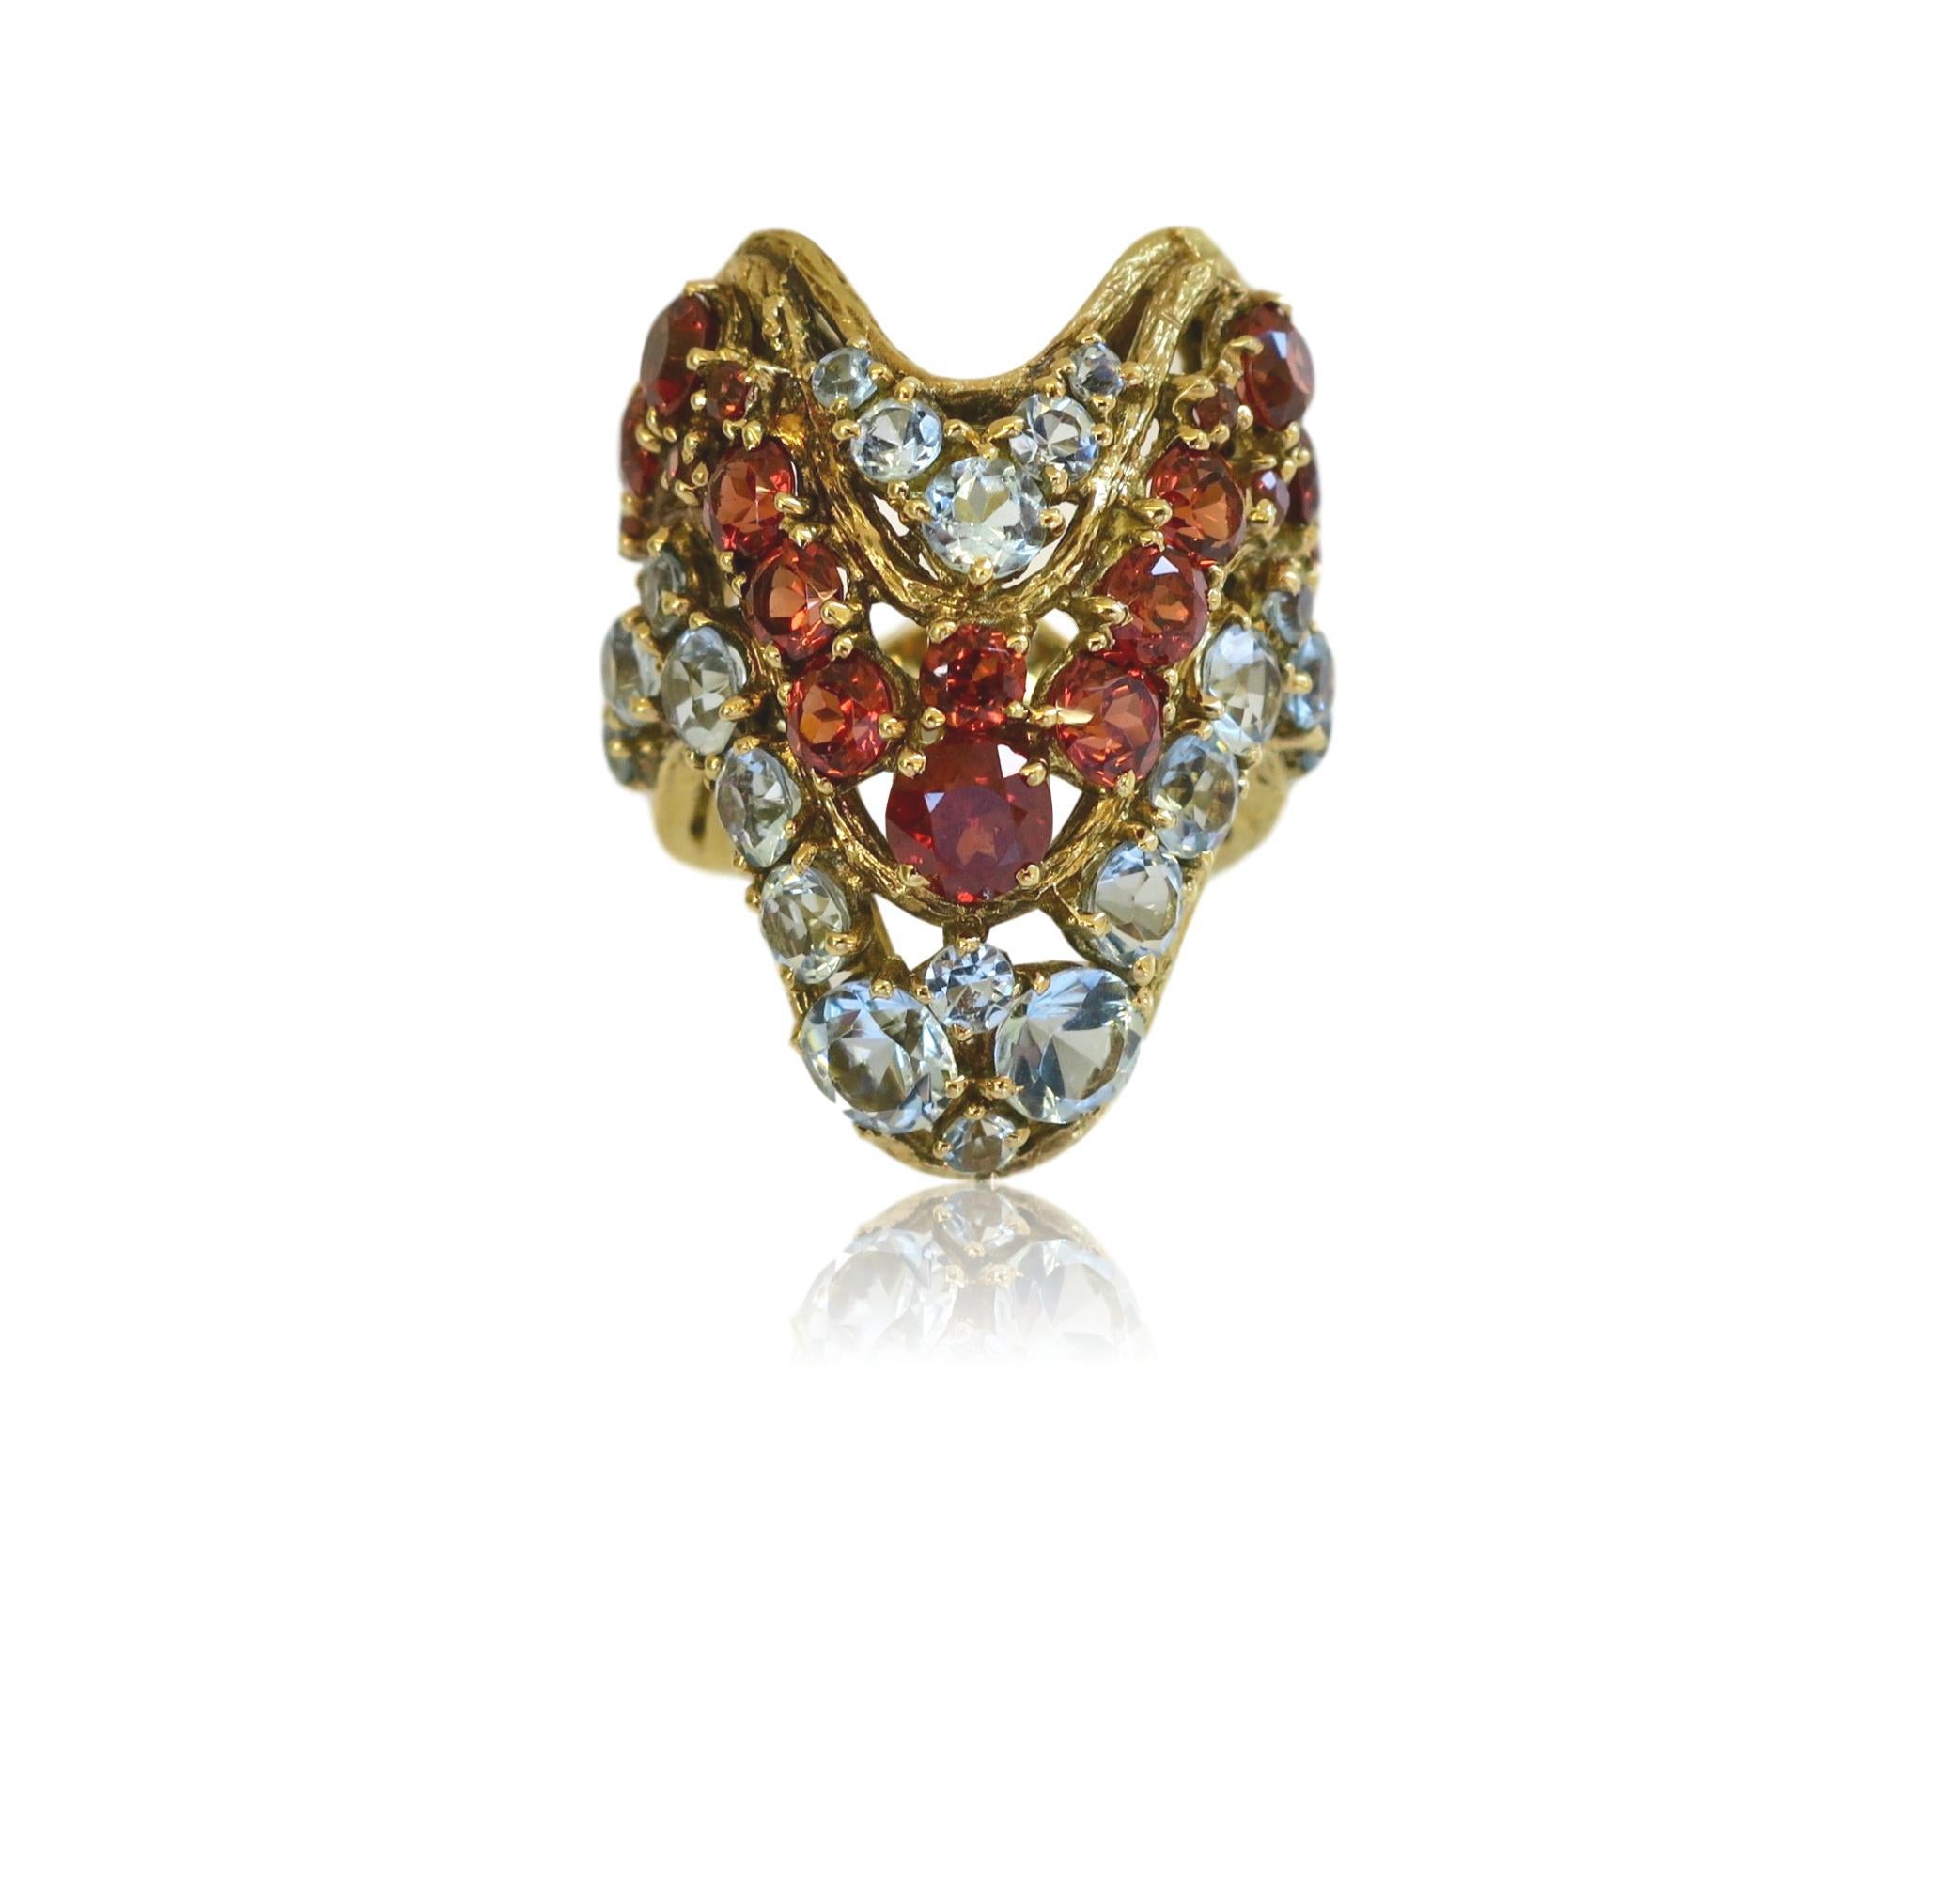 A Multi-color Gemstone cocktail ring by H.Stern. The chevron patterned textured 18k ring with alternating rows of round icy aquamarines and rich orange-brown hessonite garnets. 
Inspired by the  pendulum swing in fashion .. Gucci , Prada, etc. we